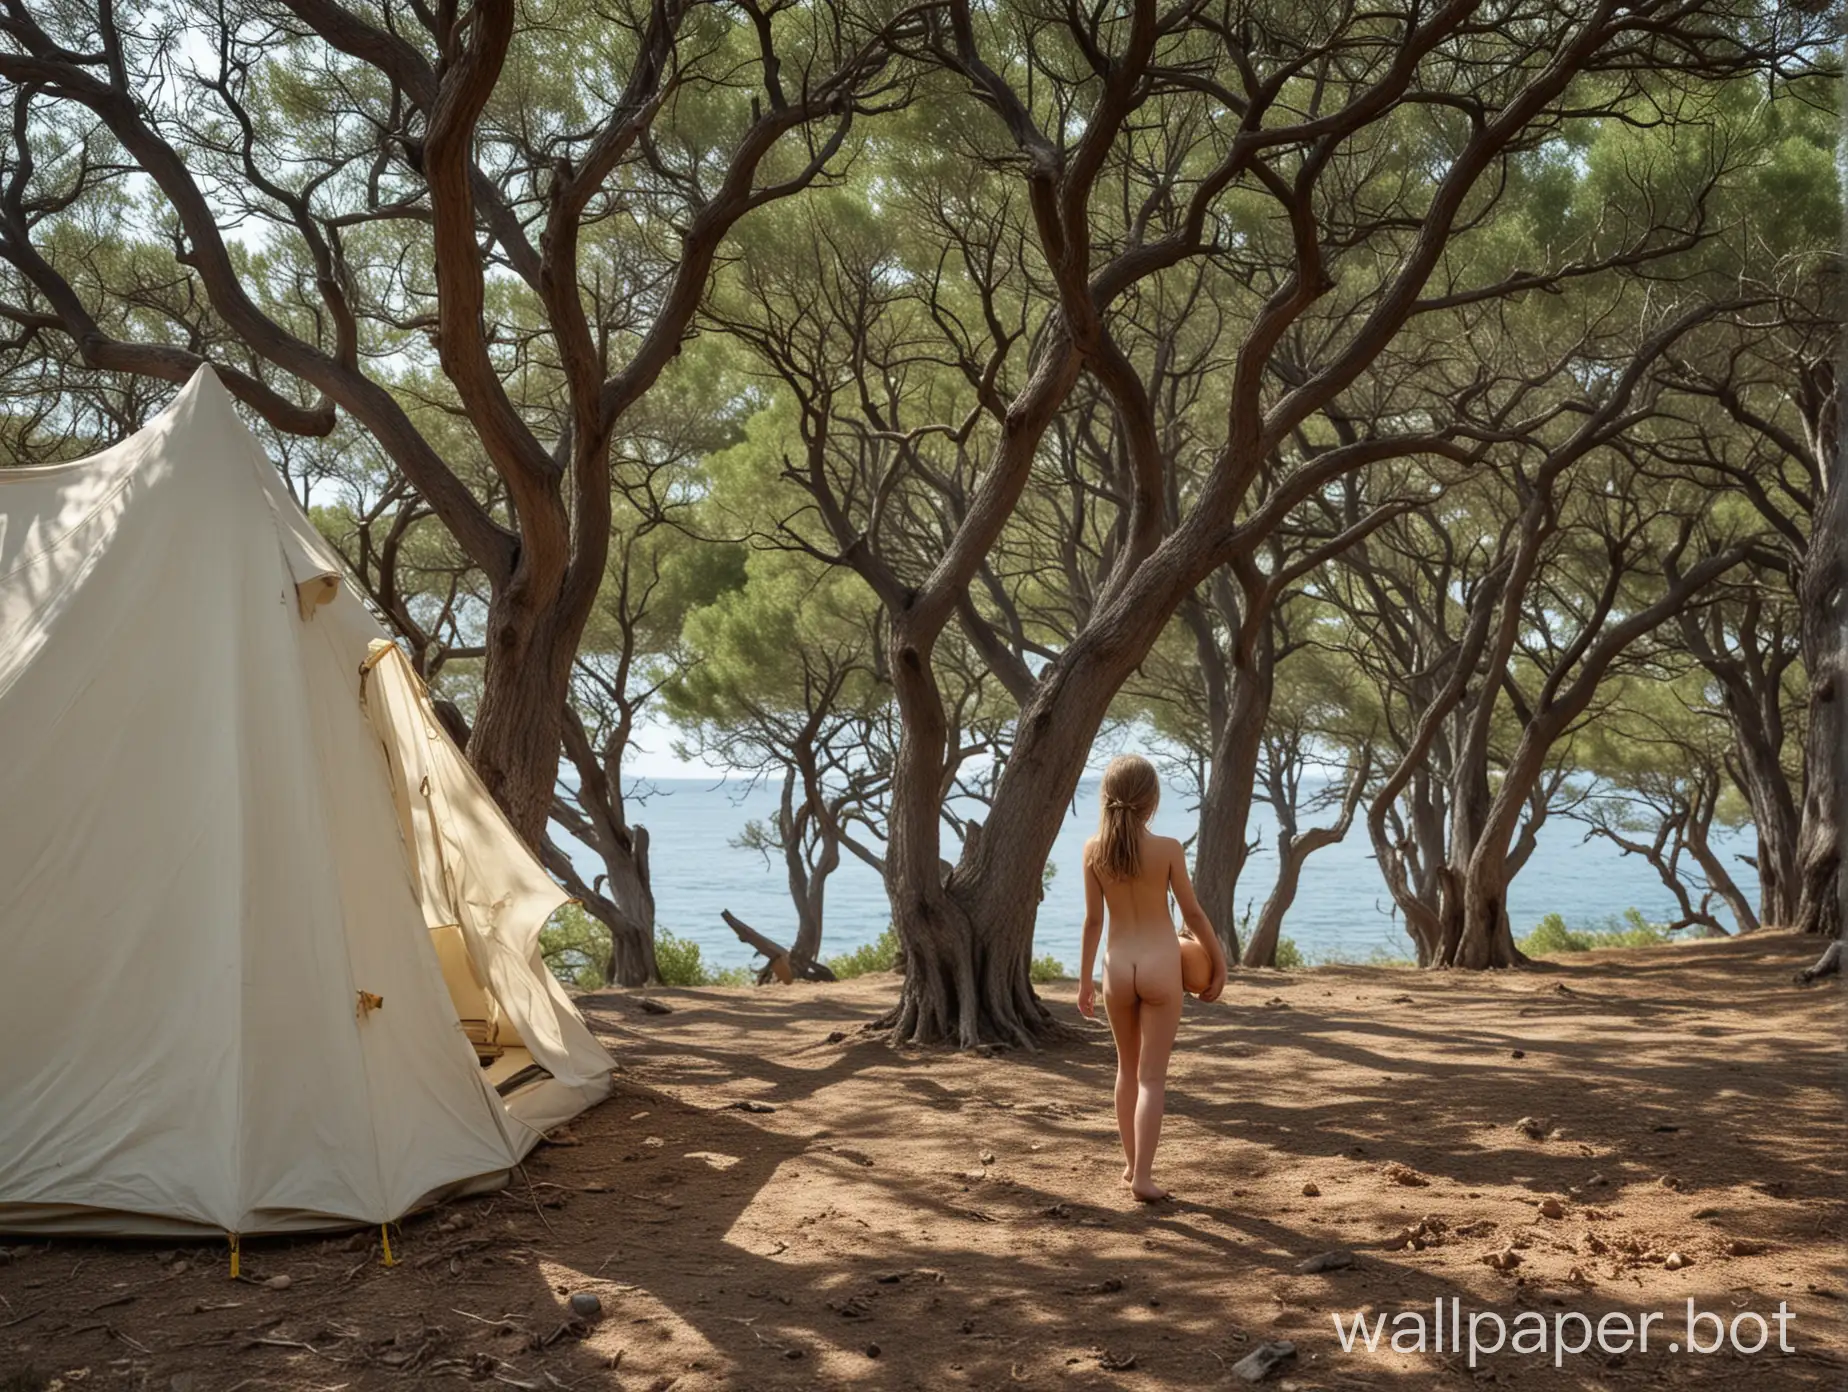 Crimea, sea, oaks, juniper, naked girl 10 years old, full height, tent, distant view of the sea, rear view